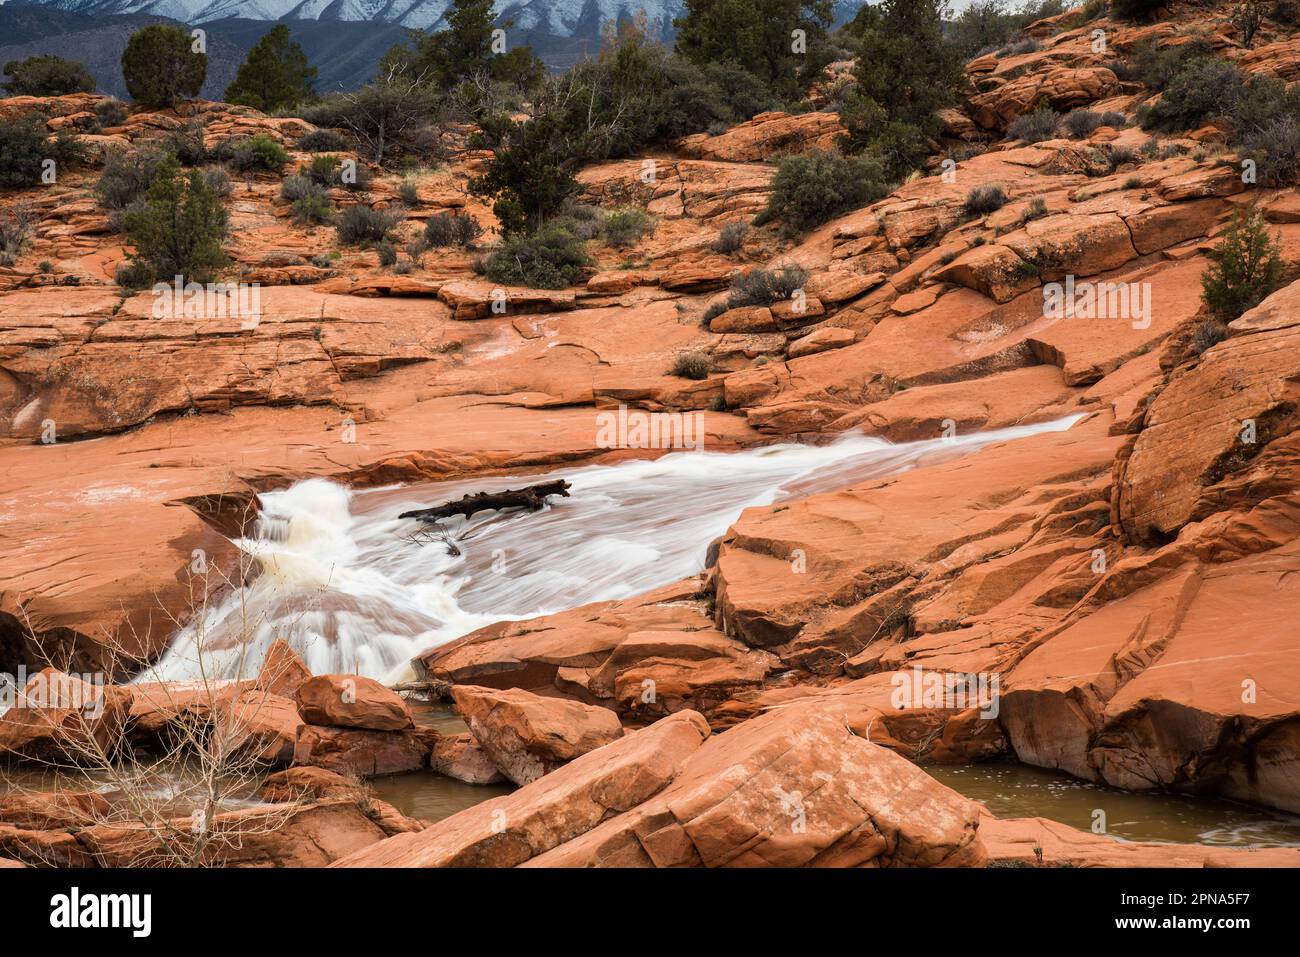 Gunlock Falls in the desert of southern Utah, USA.  These falls only appear during rare heavy rainfall in this harsh desert climate. Stock Photo